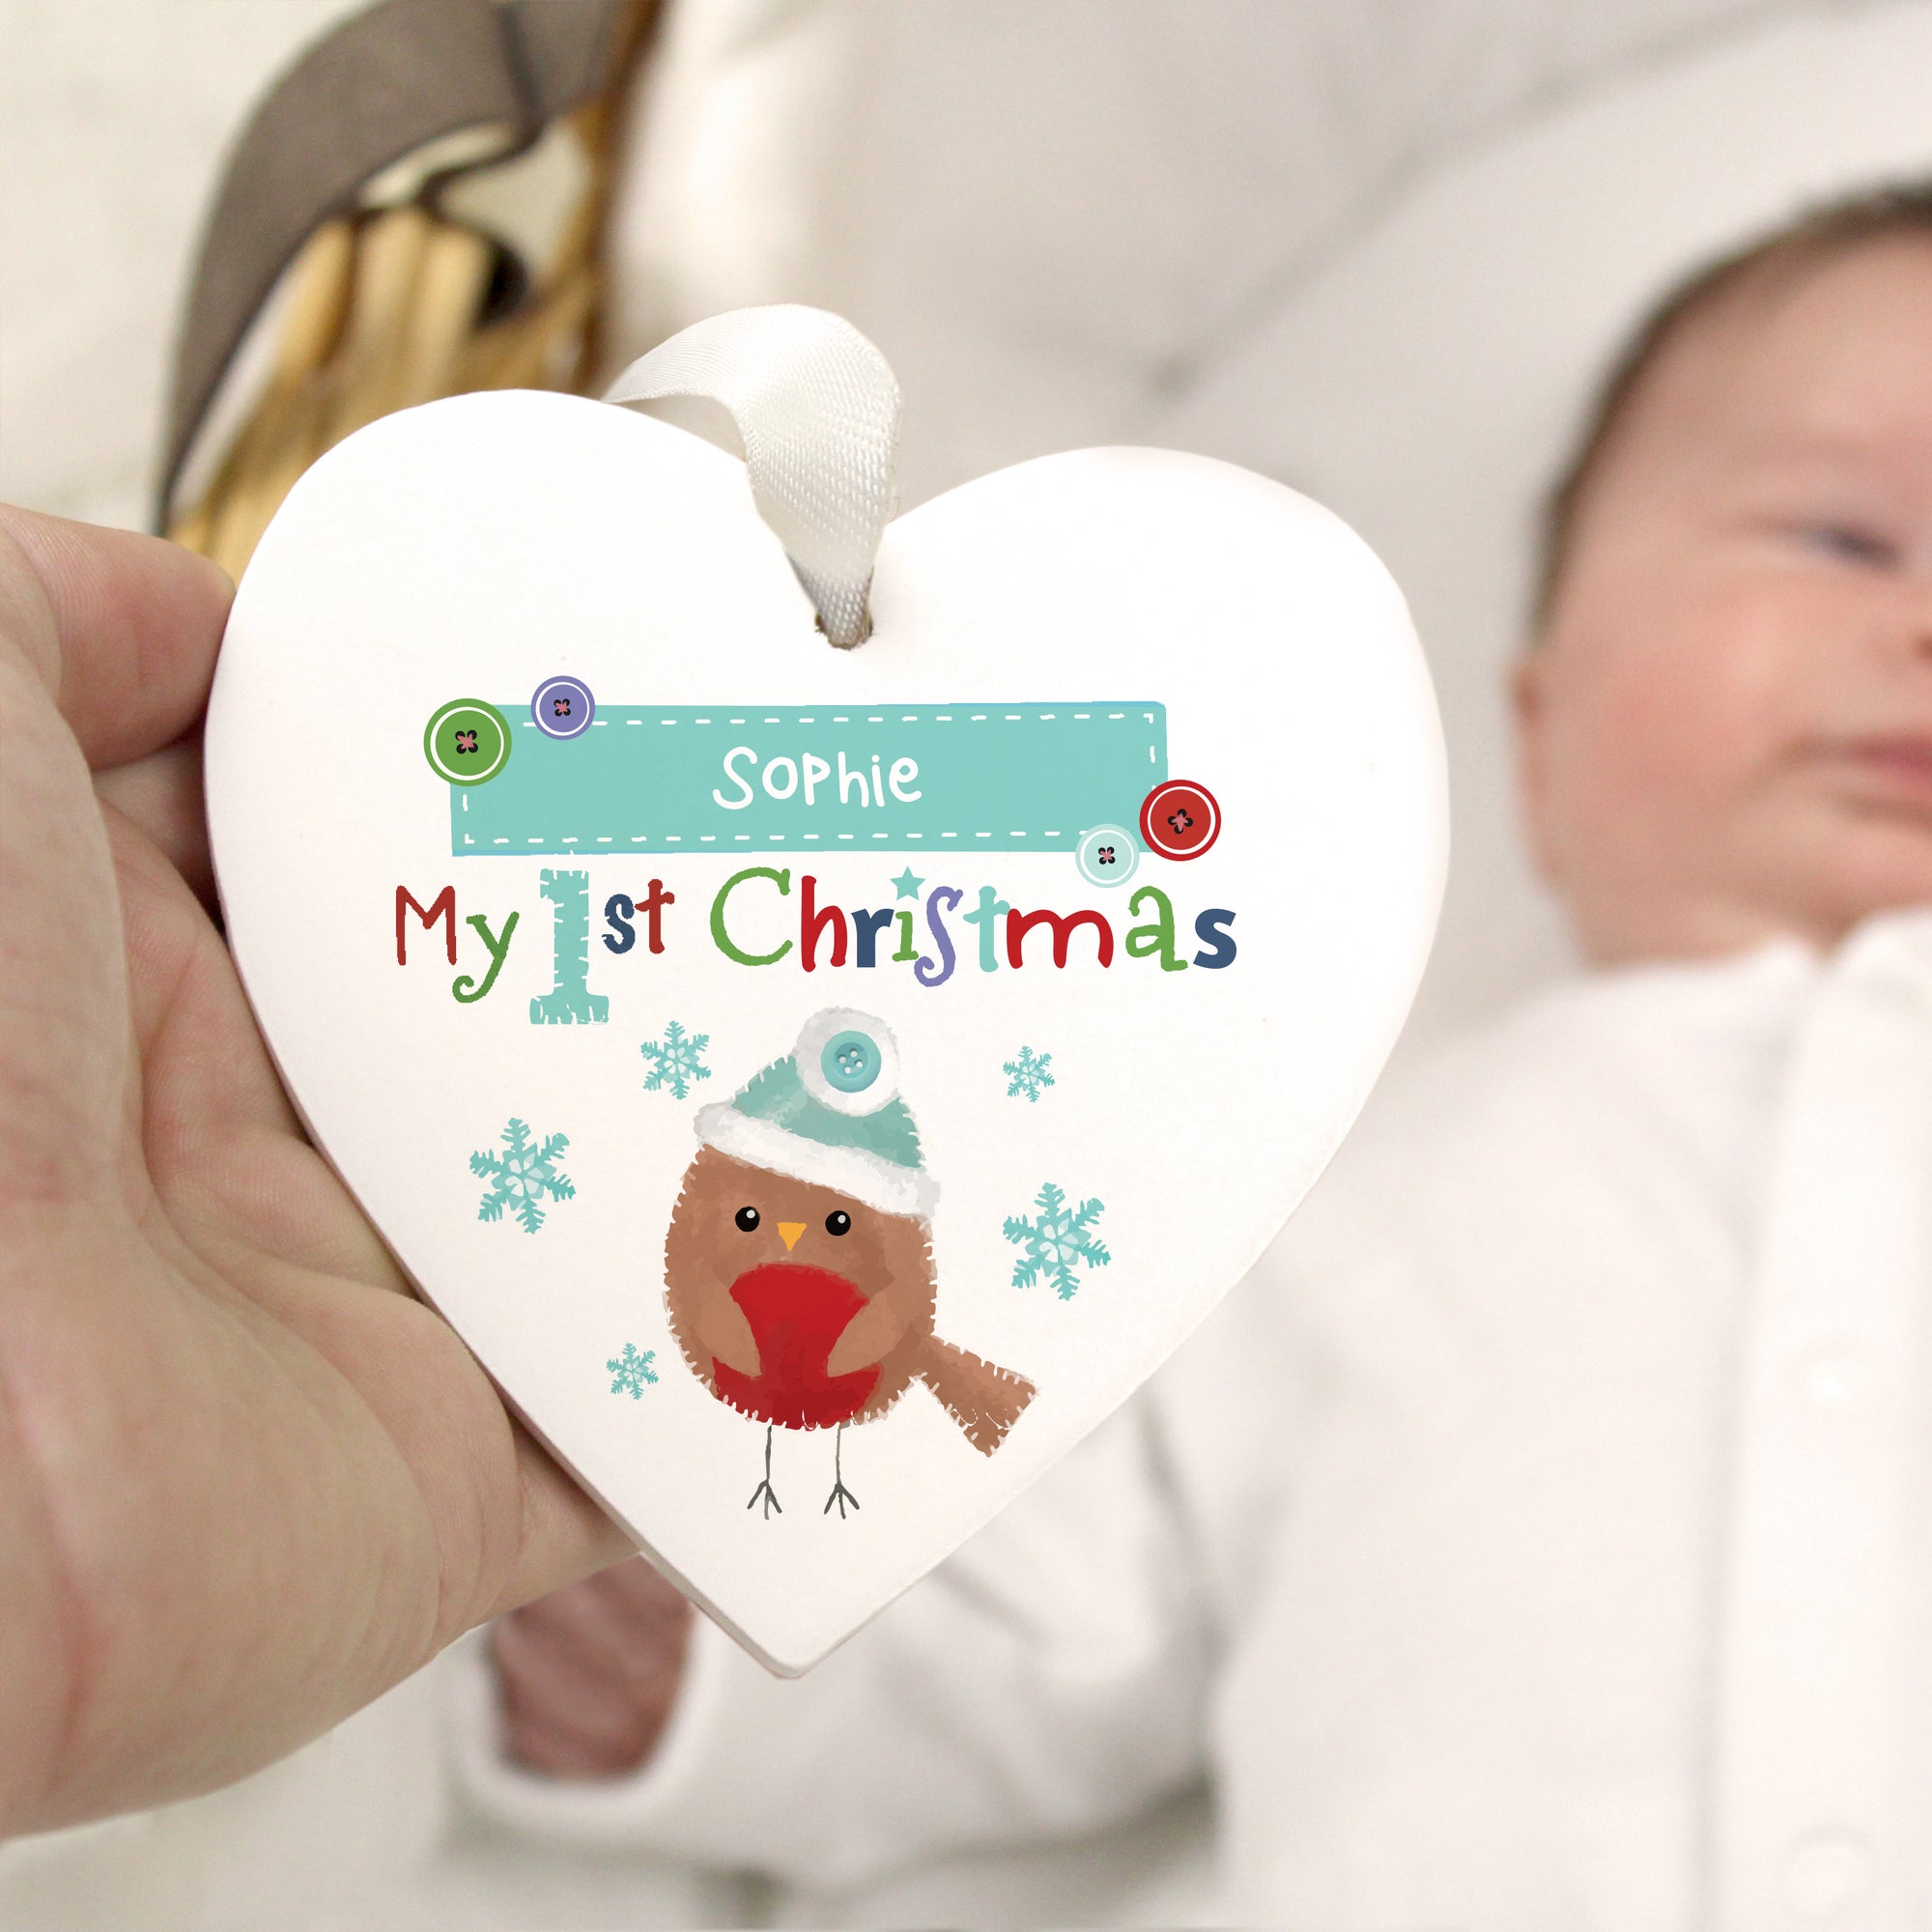 Personalised white wooden heart shaped Christmas decoration featuring an image of a hand-painted robin and the text 'My 1st Christmas' in bright letters. The decoration can be personalised with a name of your choice up to 12 characters.